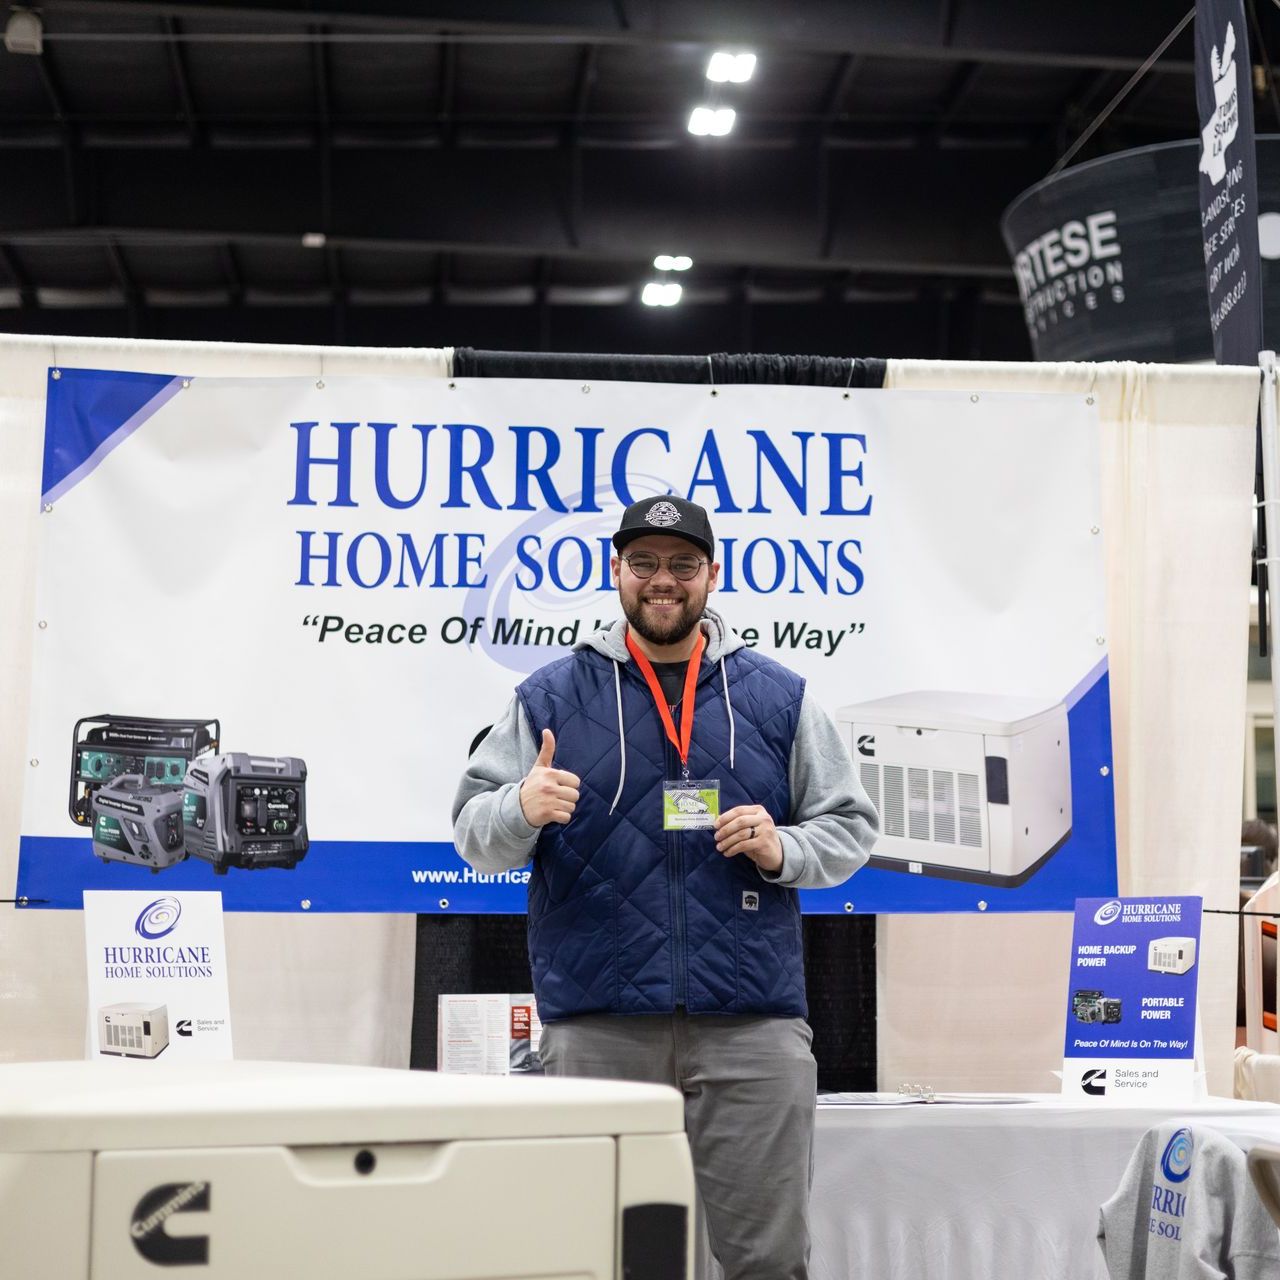 Jordan from HHS made an appearance at the Hamburg Home Show